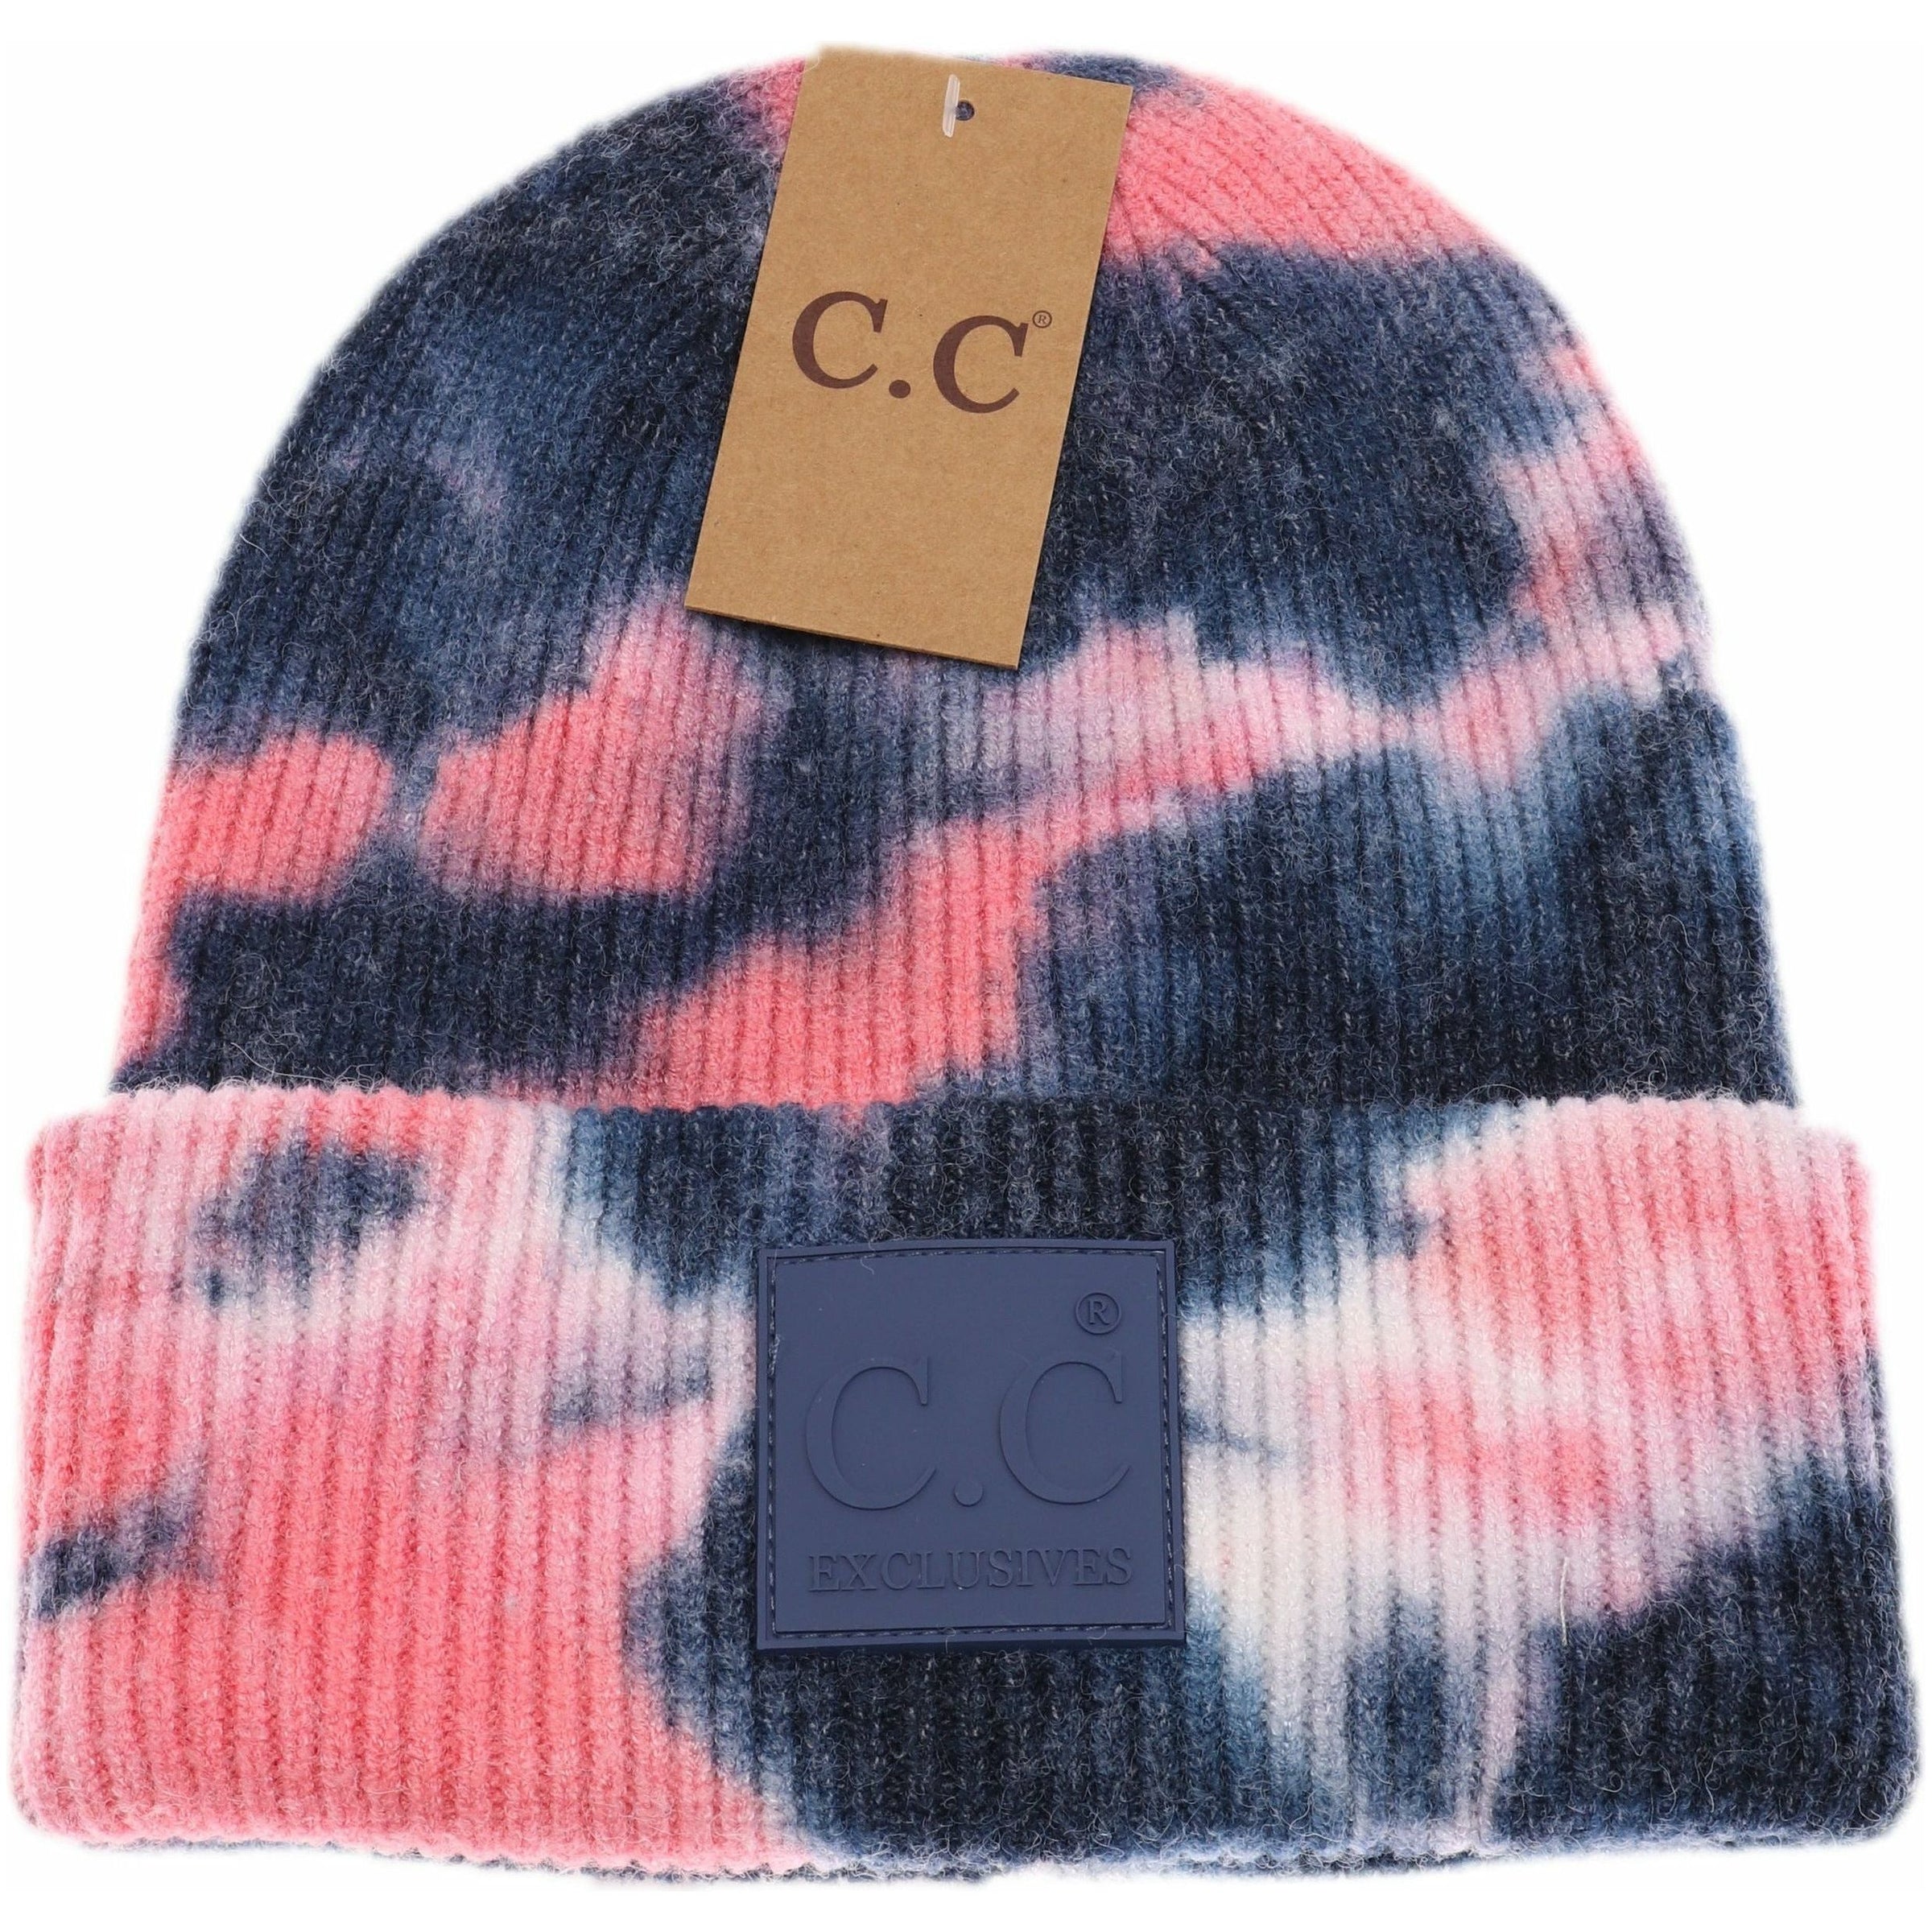 CC Beanies Diagonal Stripes Cross Pattern Pom Beanie for Adults | Warm  Winter C.C Beanie Hat with Suede Leather Patch | Best selling CC hat